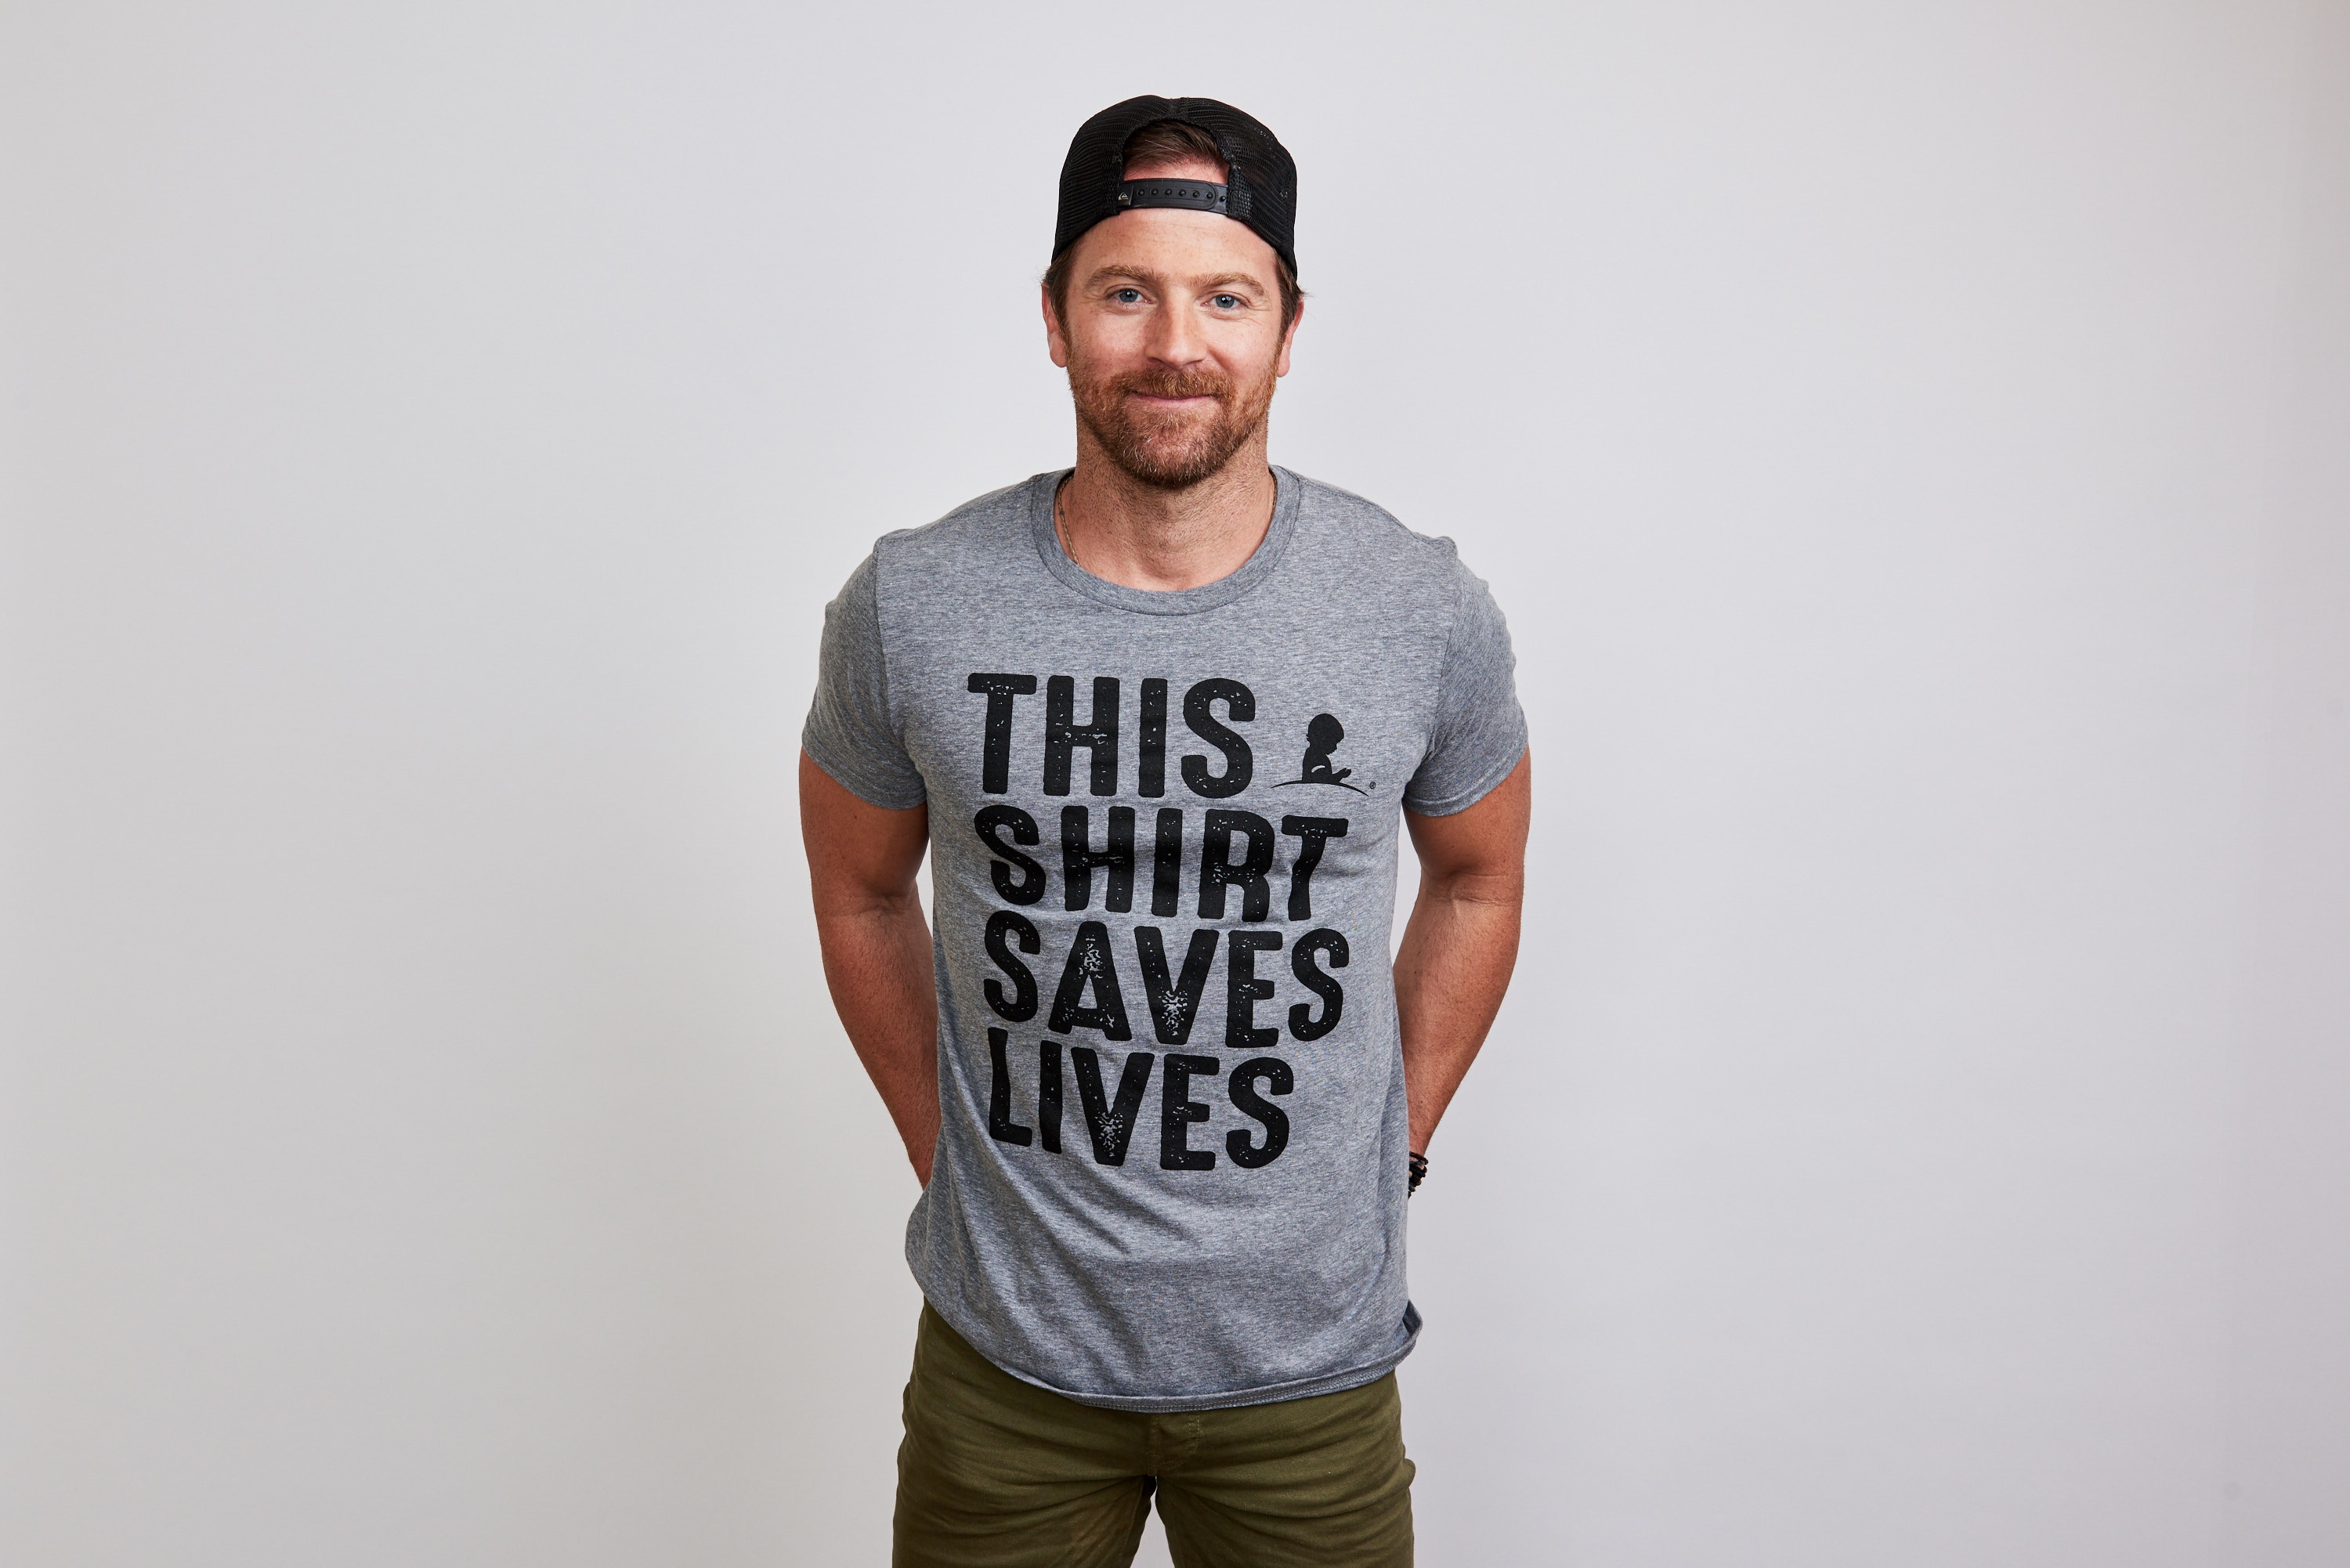 Luke Bryan and More Join St. Jude's. this shirt saves lives. 